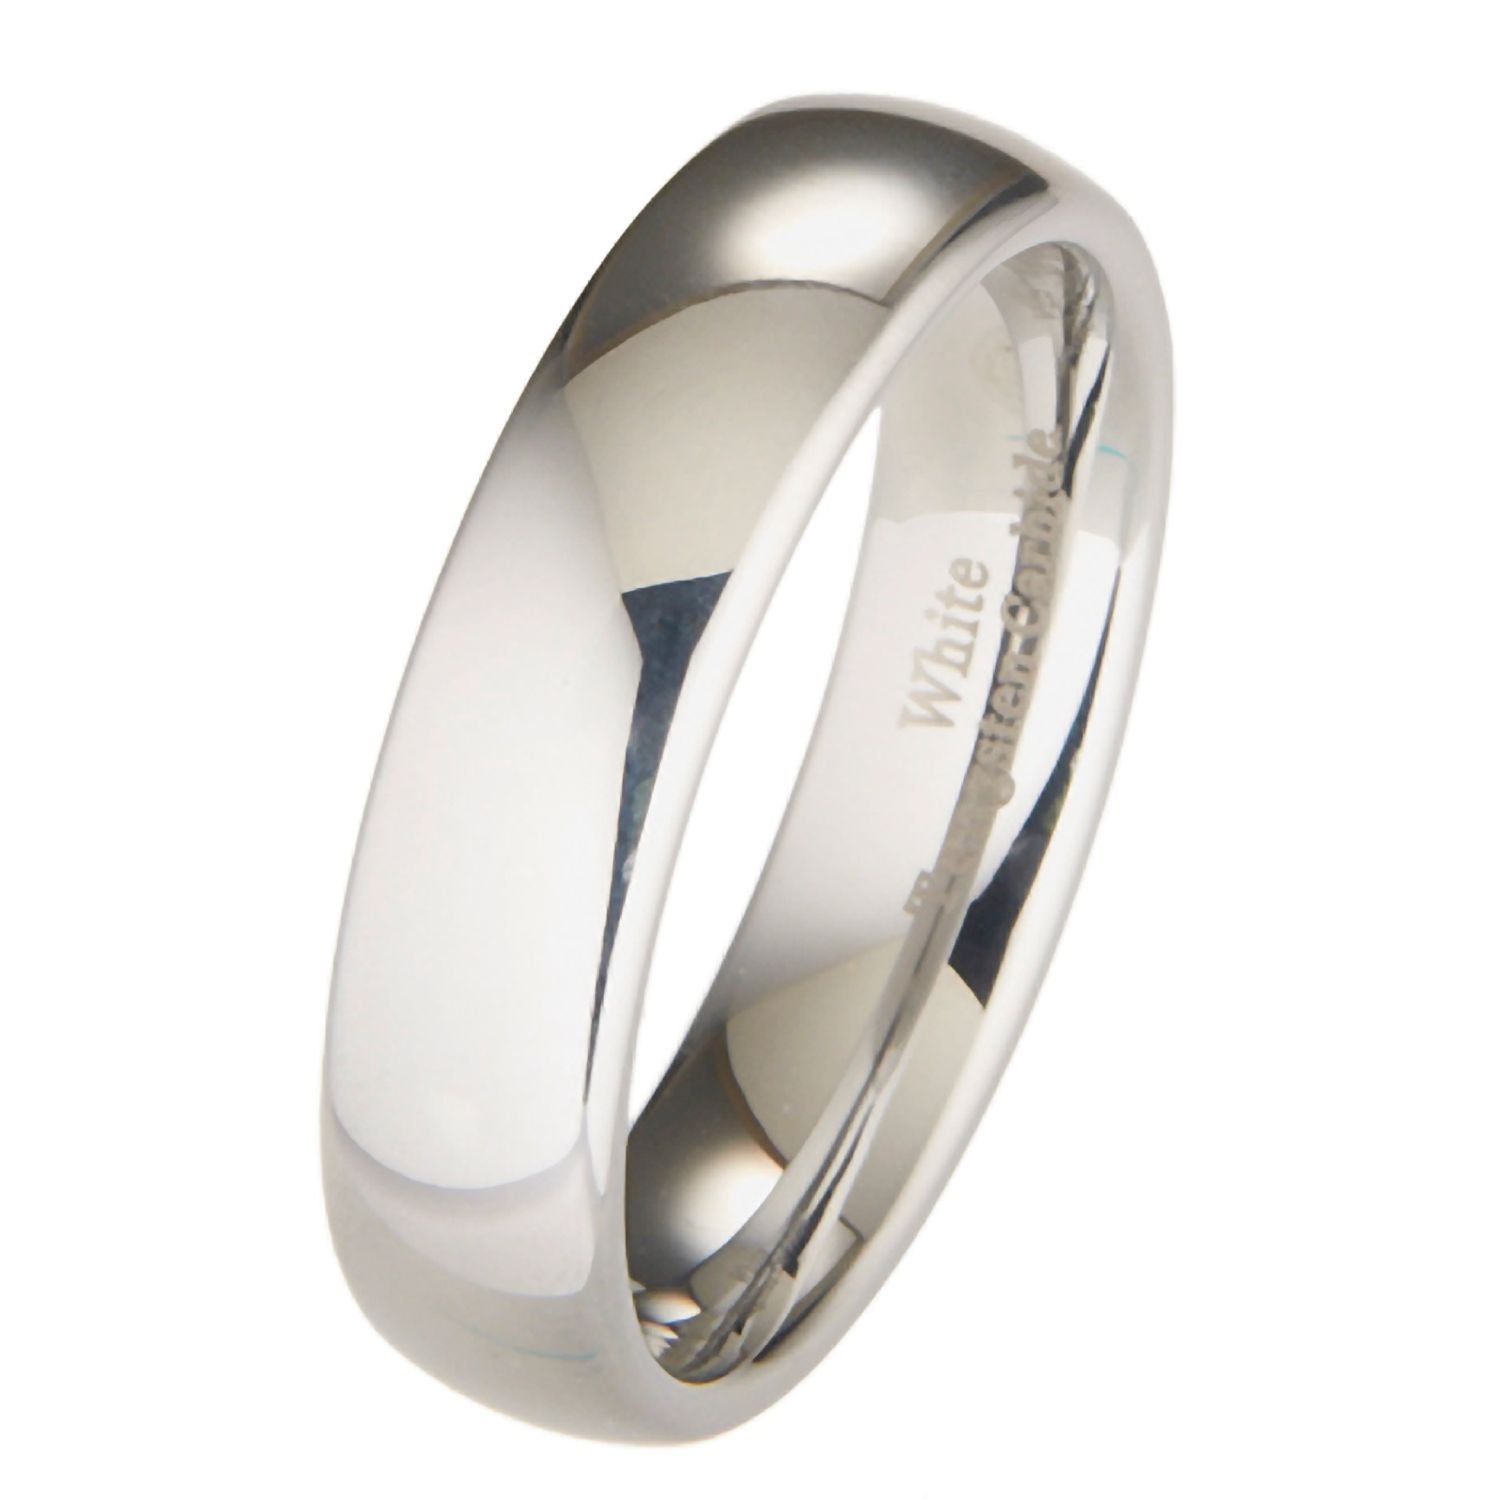 MJ Metals Jewelry Mirror Polished Classic White Tungsten Carbide Ring